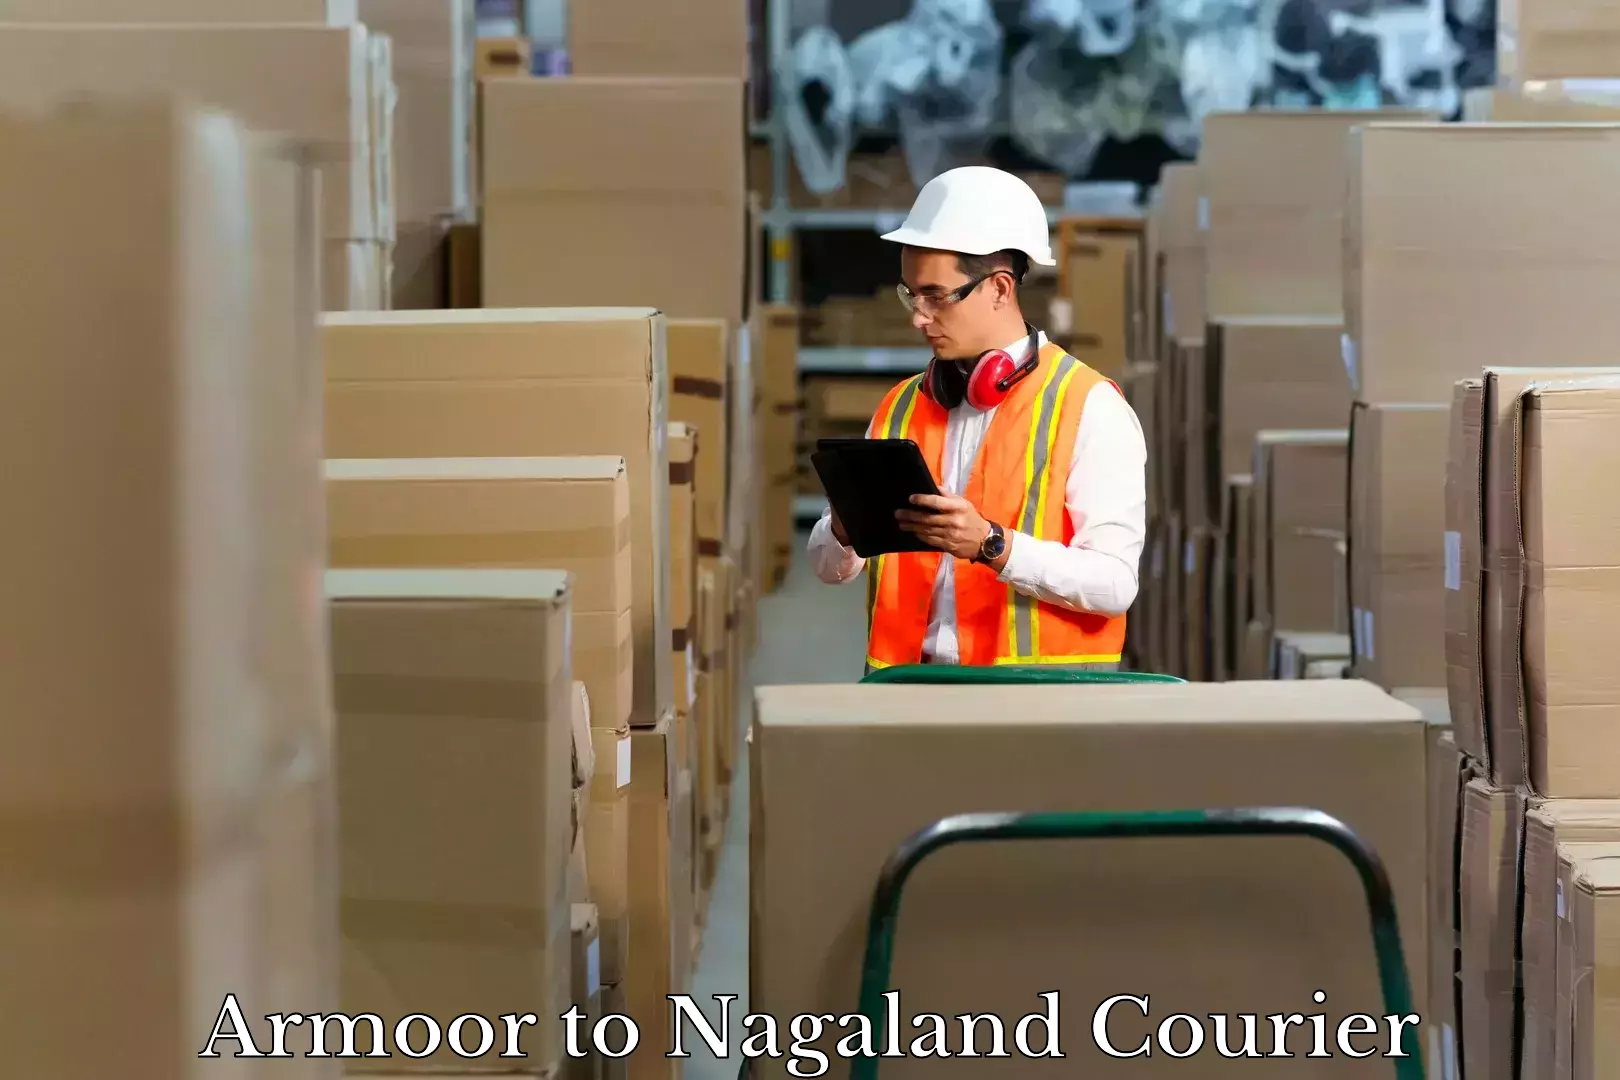 Luggage transport service Armoor to Nagaland